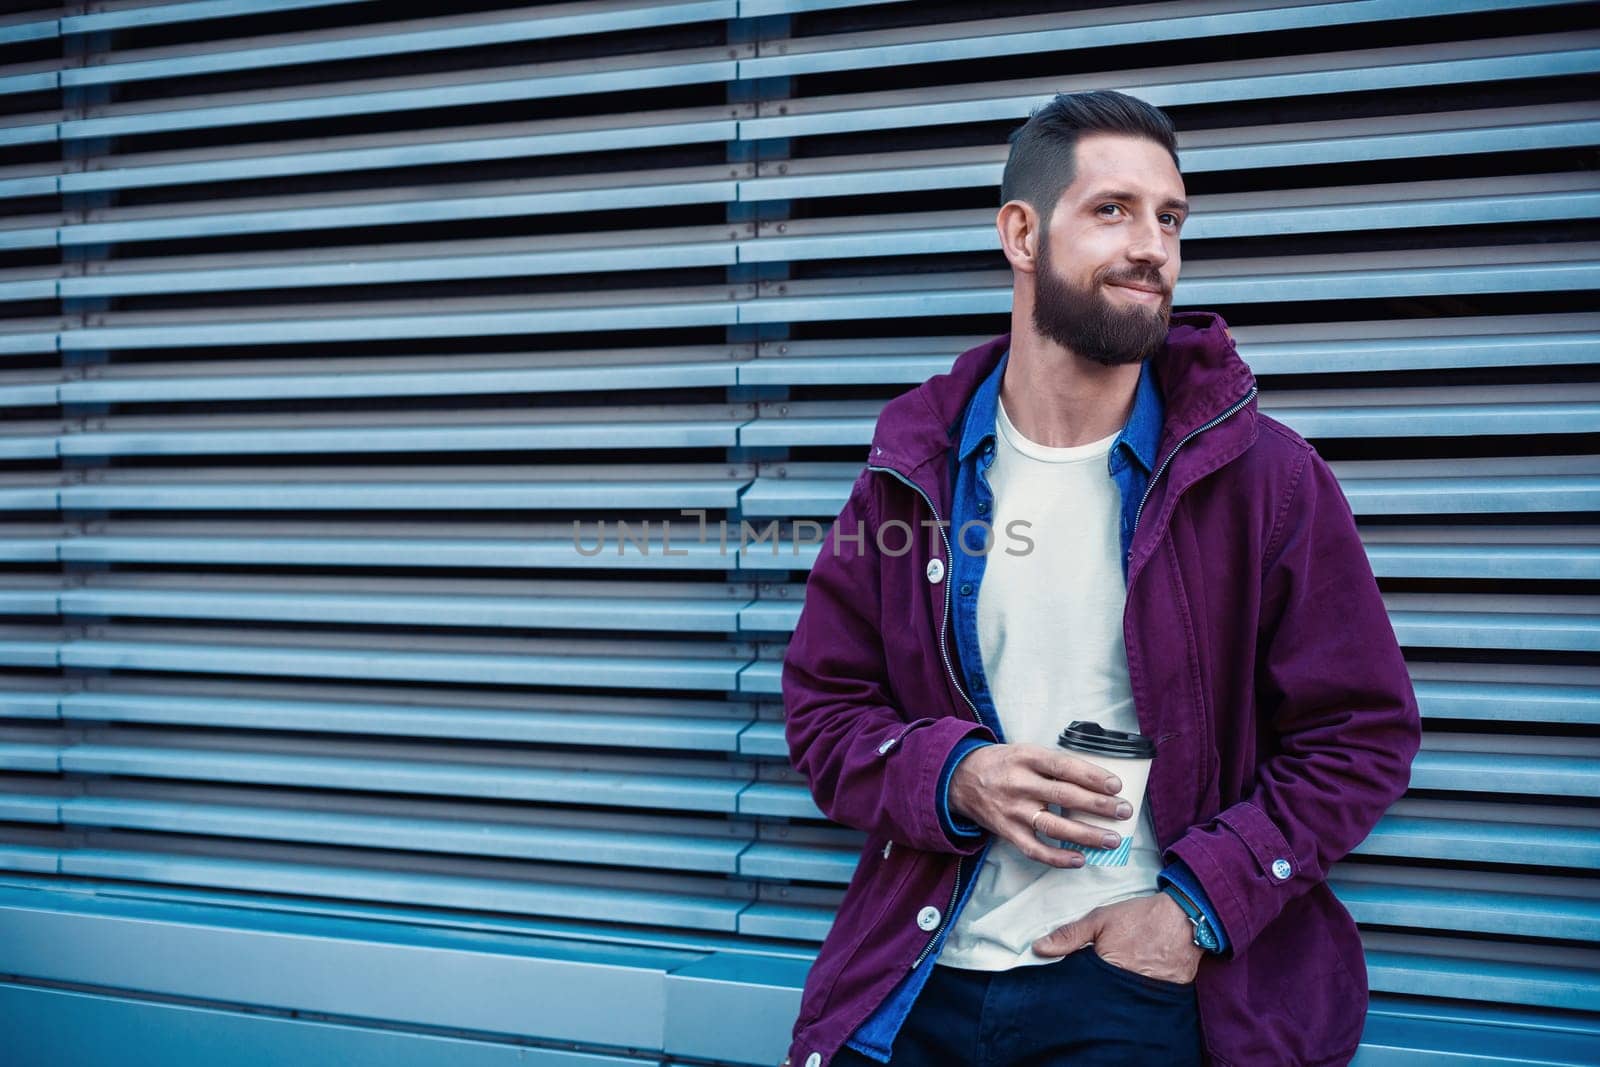 Outdoor fall or winter portrait of handsome hipster man with beard, white t-shirt, blue shirt and maroon jacket holding cup of hot coffee. Ribbed urban wall background.